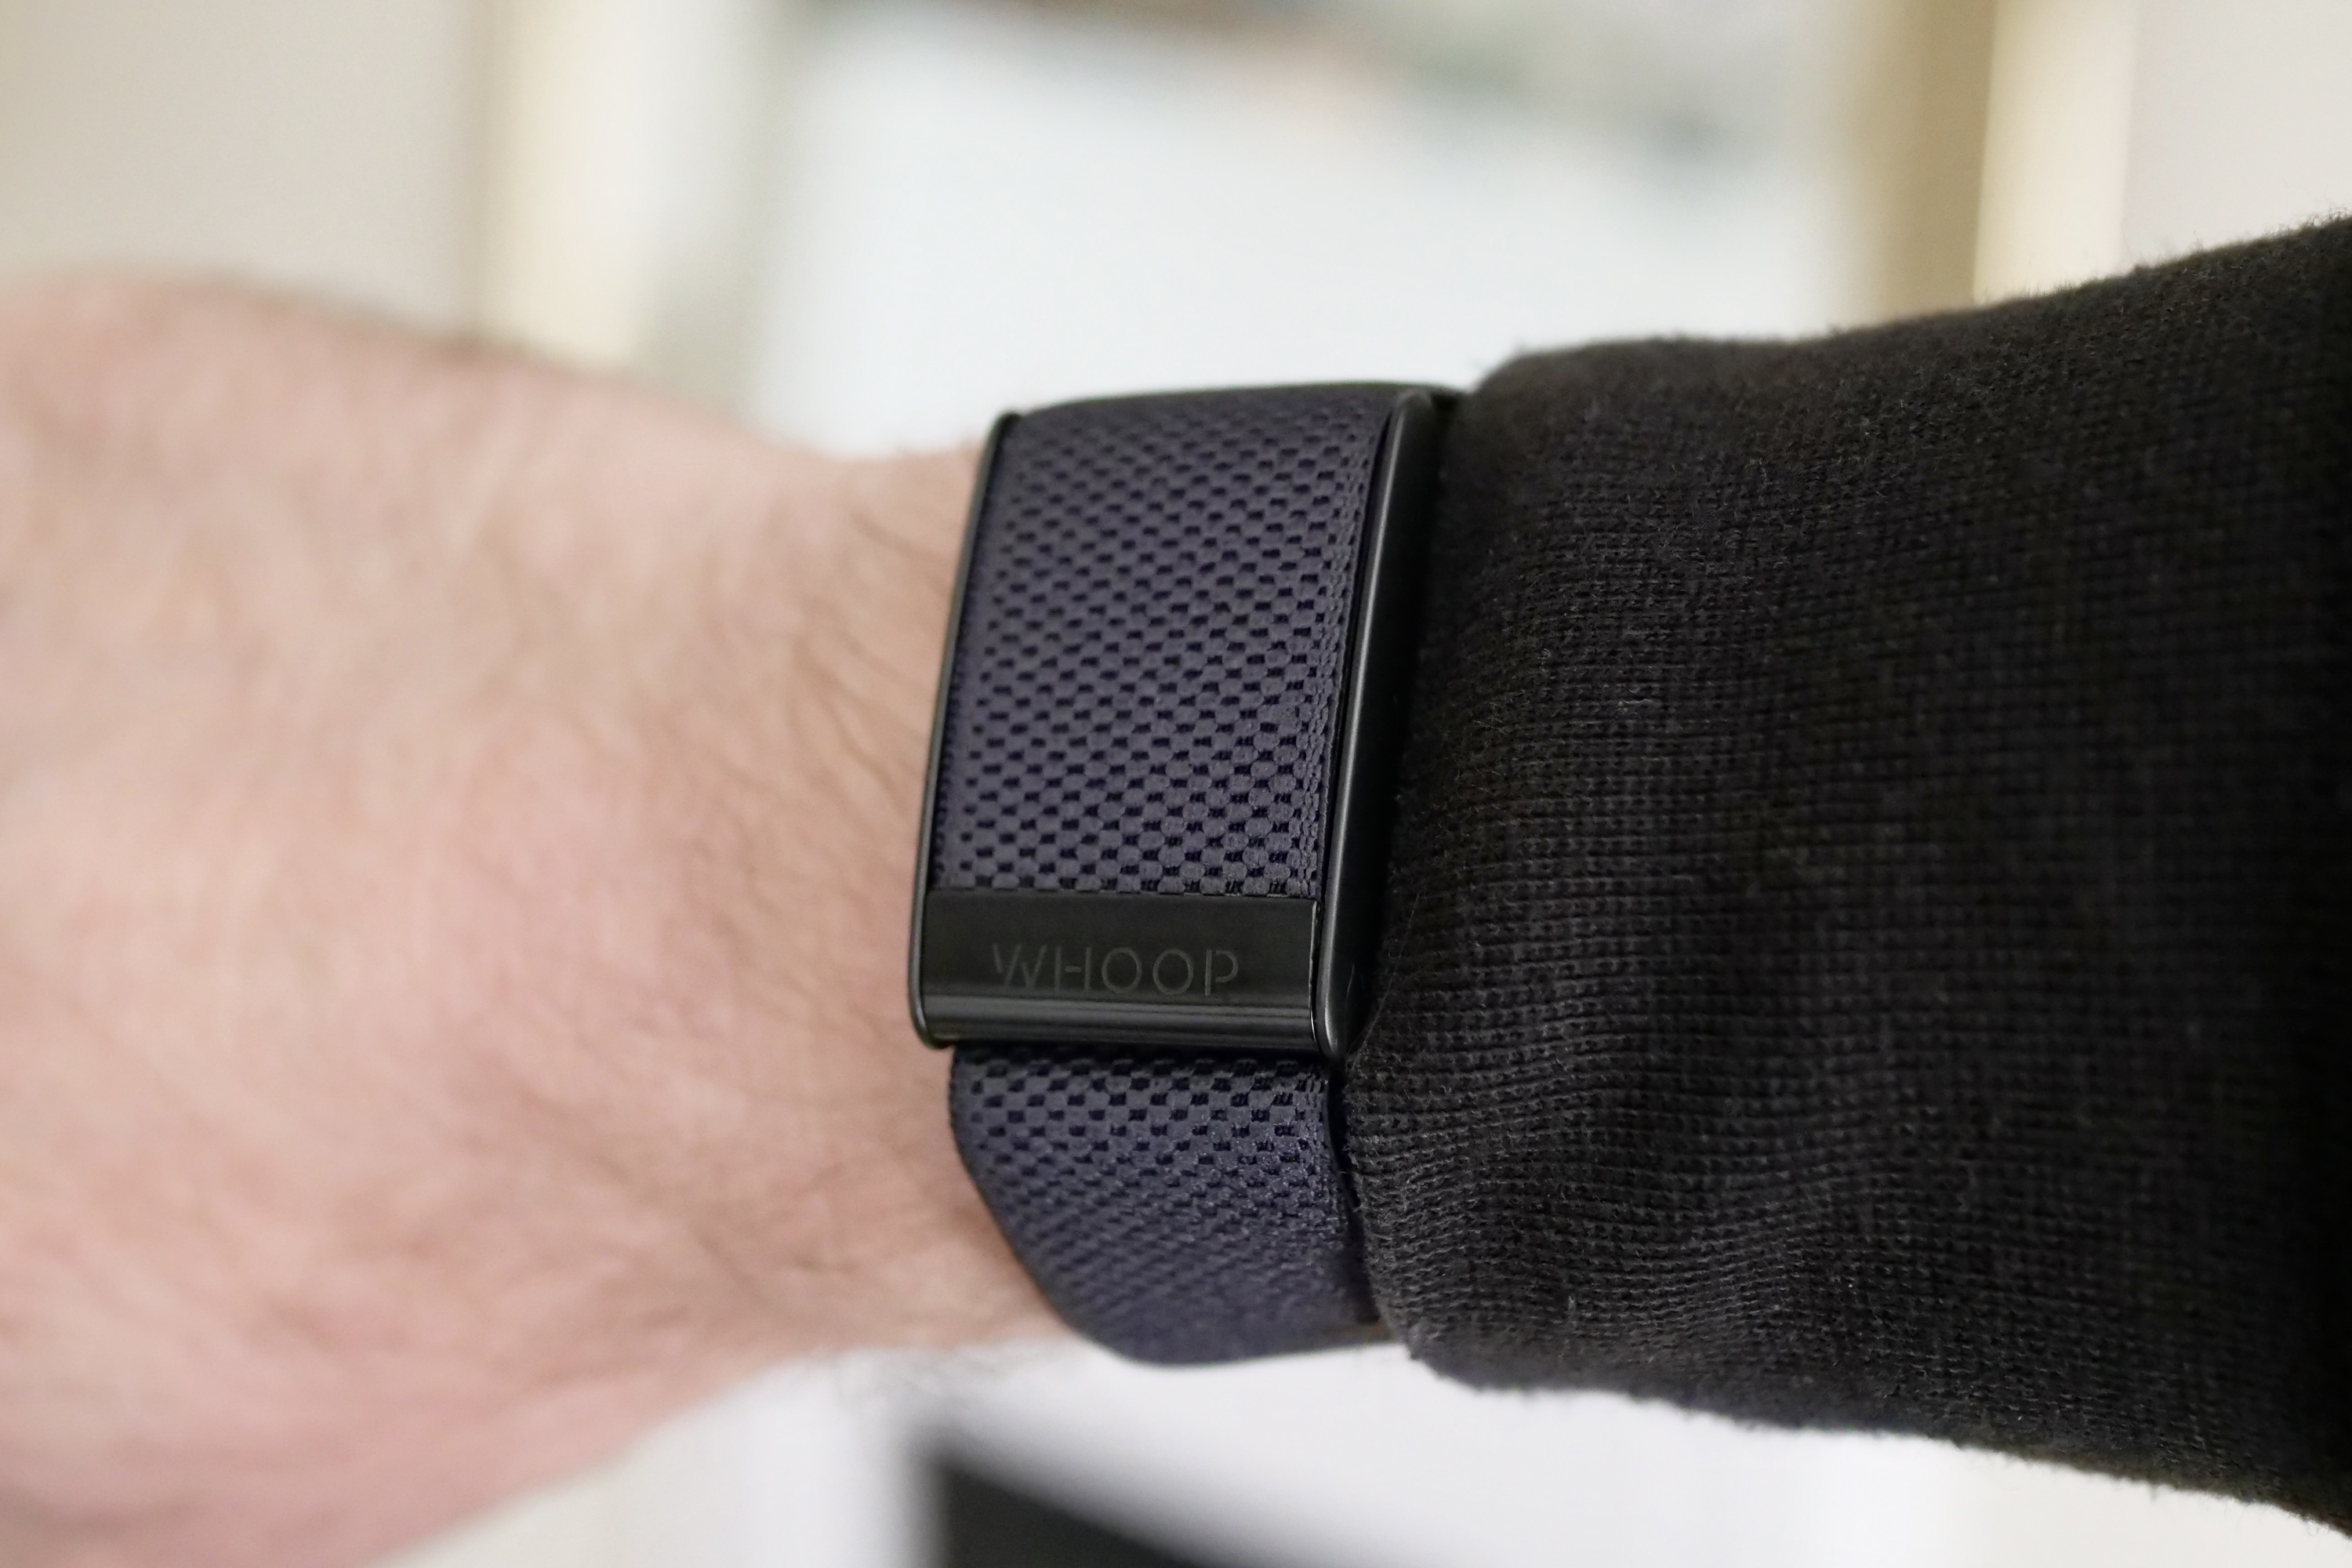 Whoop 4.0 review: This fitness tracker skipped leg day